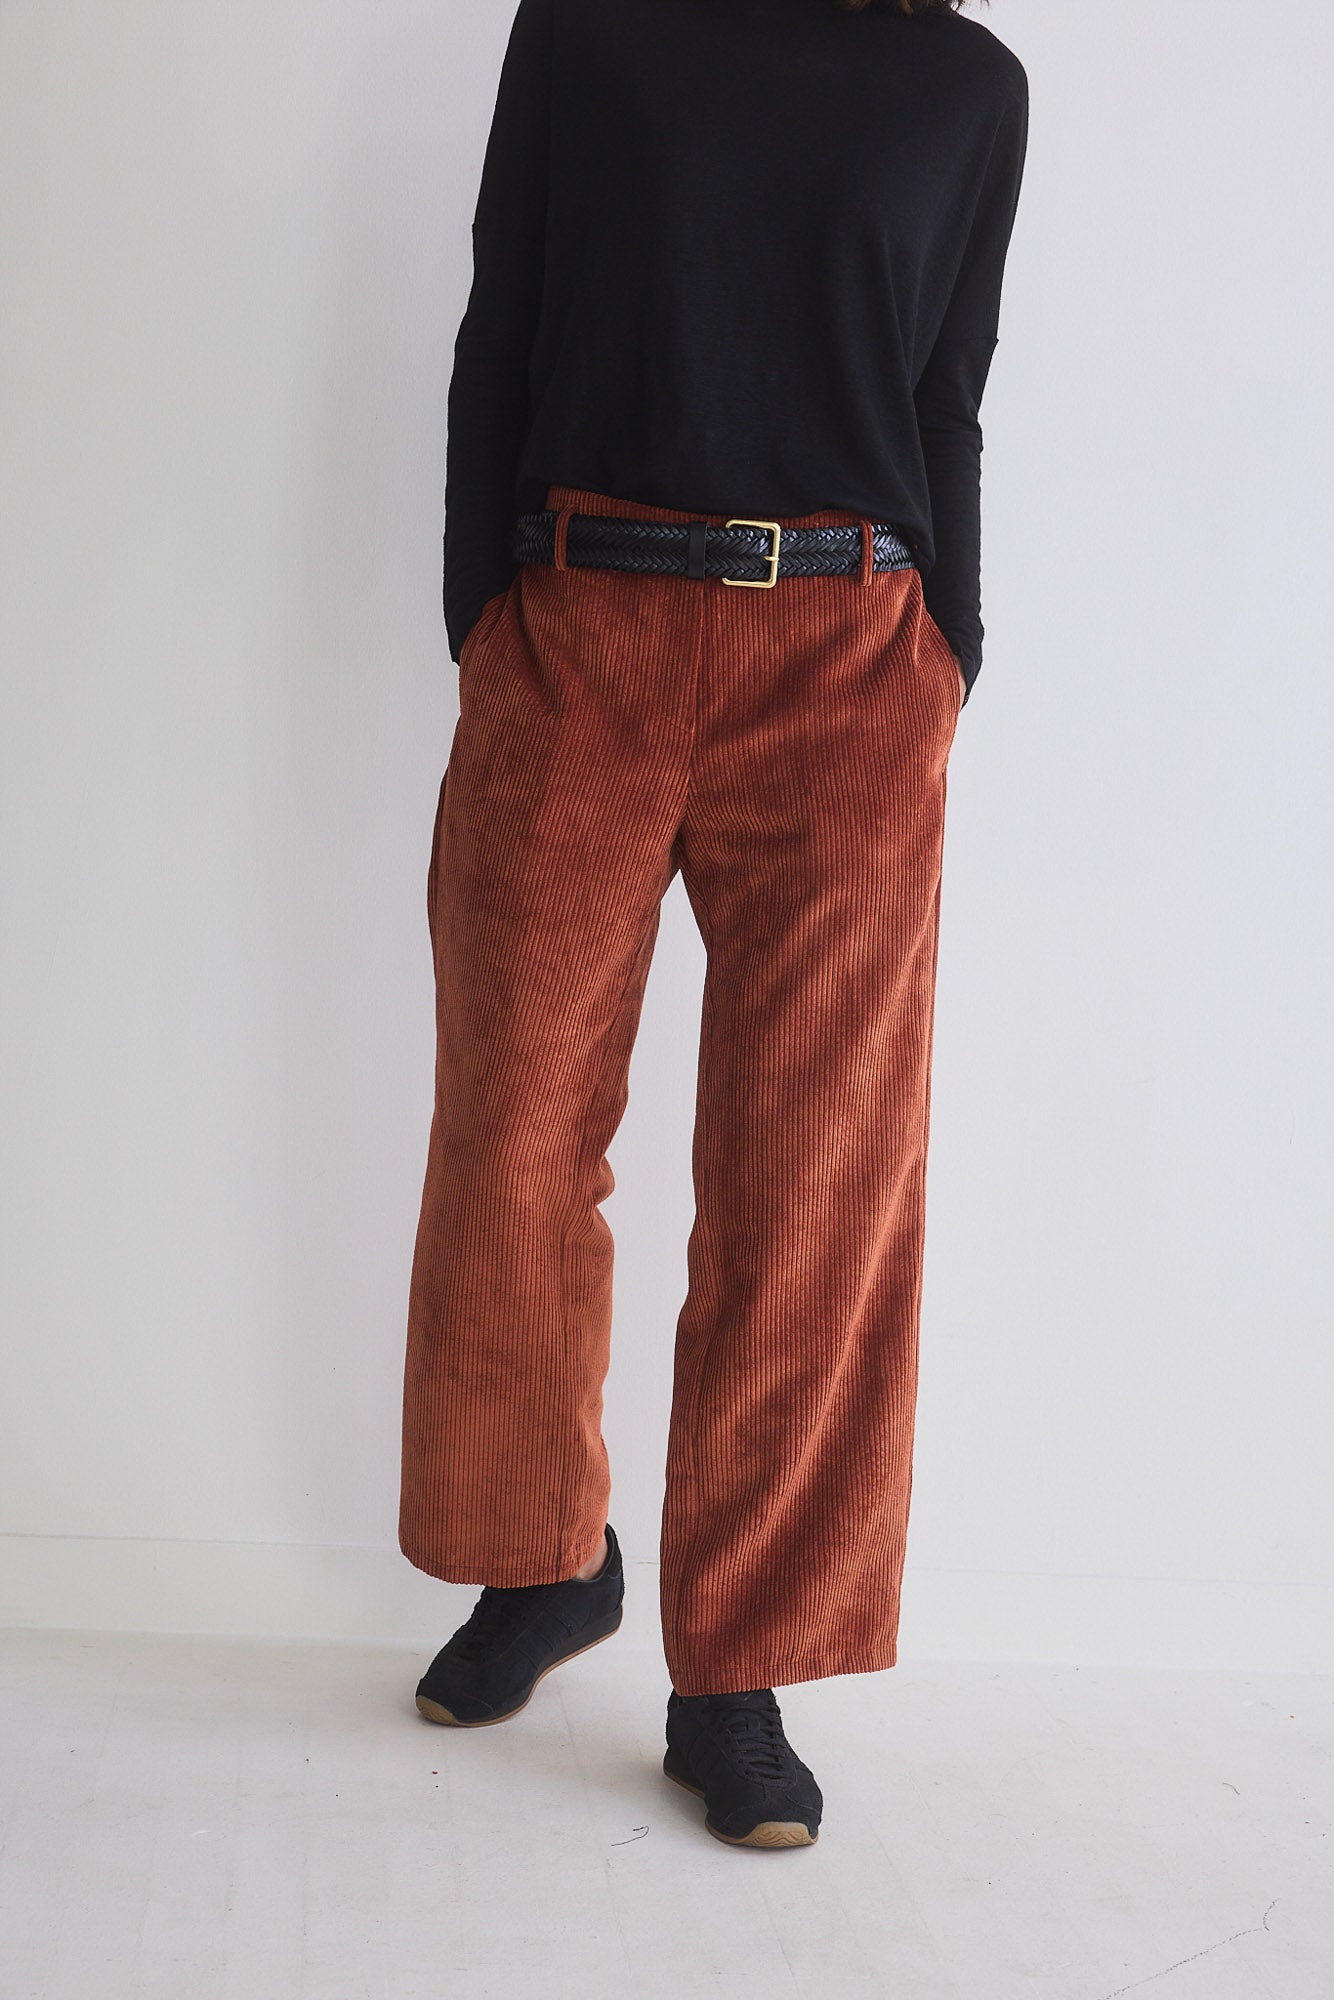 The Corduroy Pants from the 70s